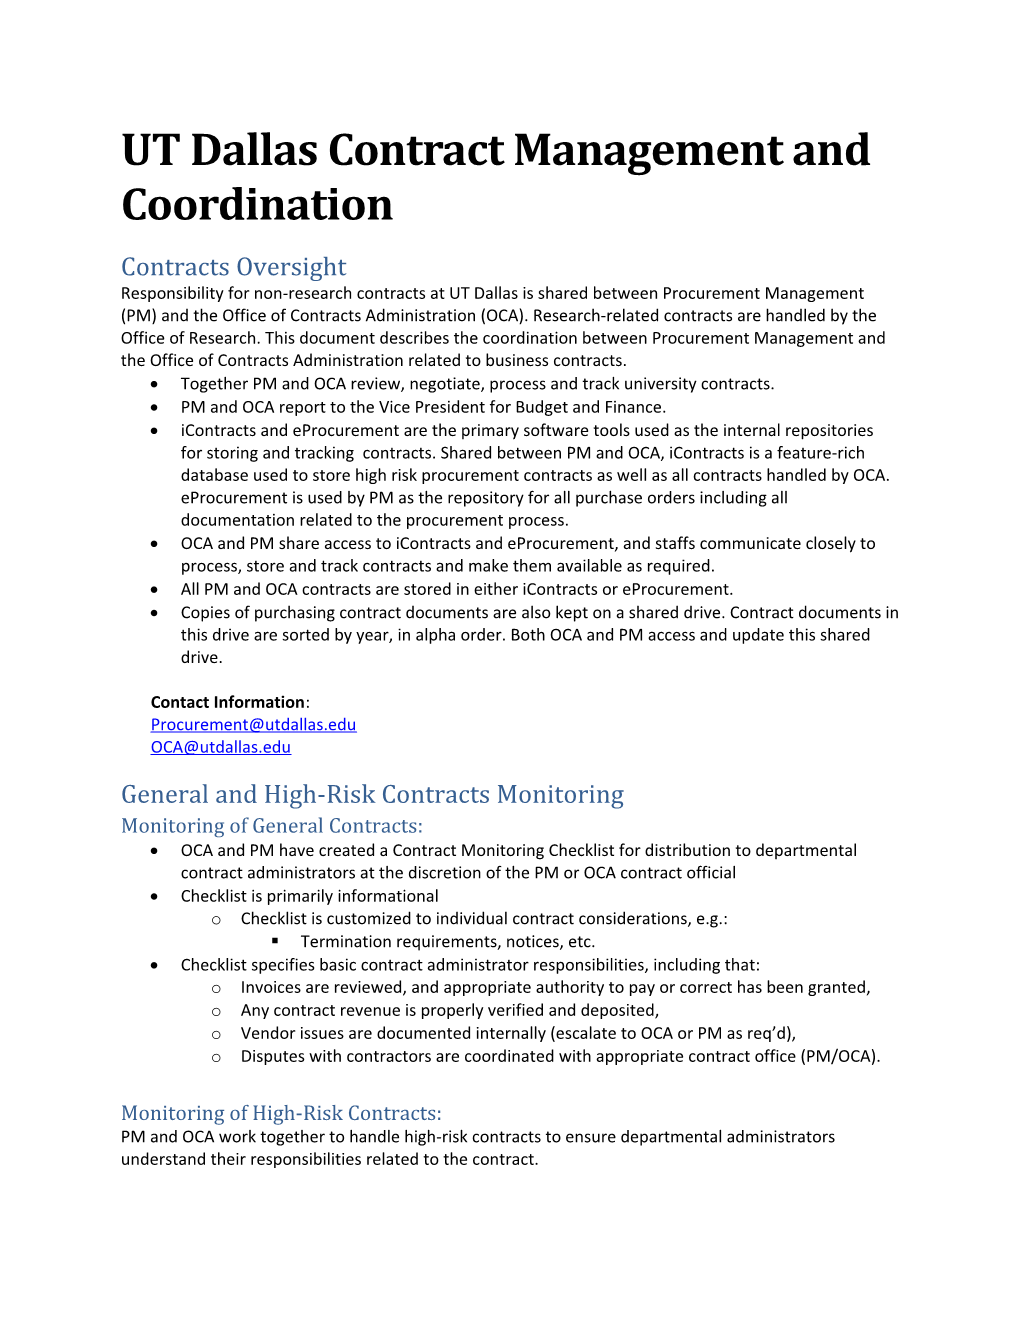 UT Dallas Contract Management and Coordination